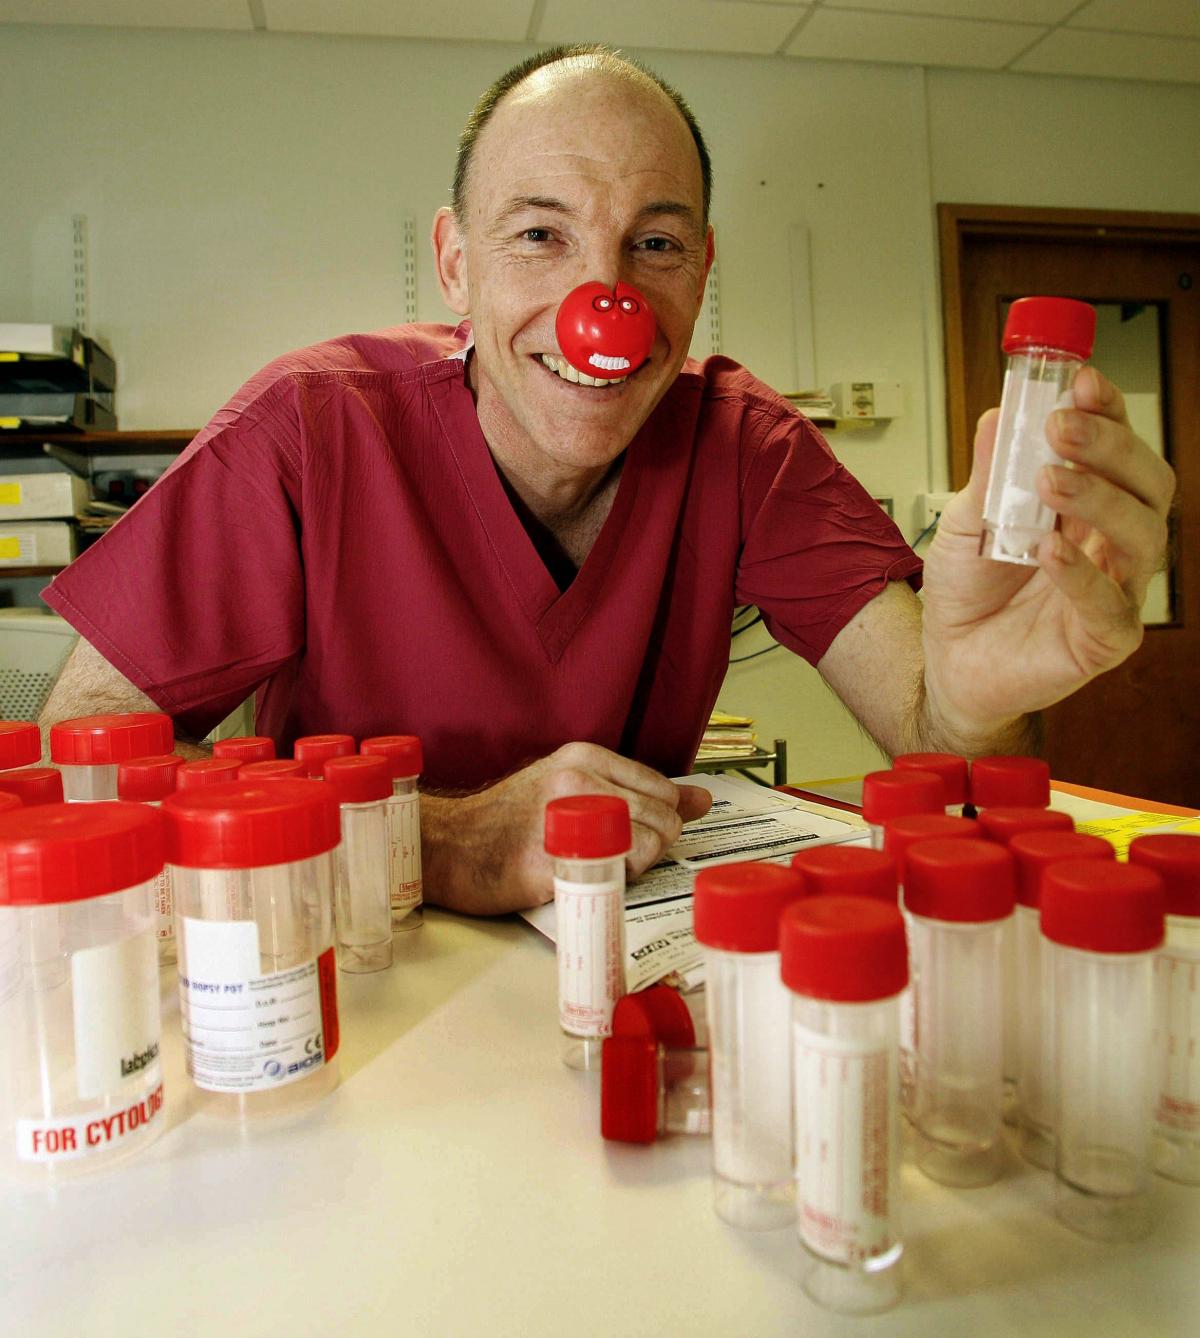 Airedale NHS Trust chief executive Adam Cairns prepares sample bottles in the the hospital's endoscopy department as part of his Red Nose Day challenge.